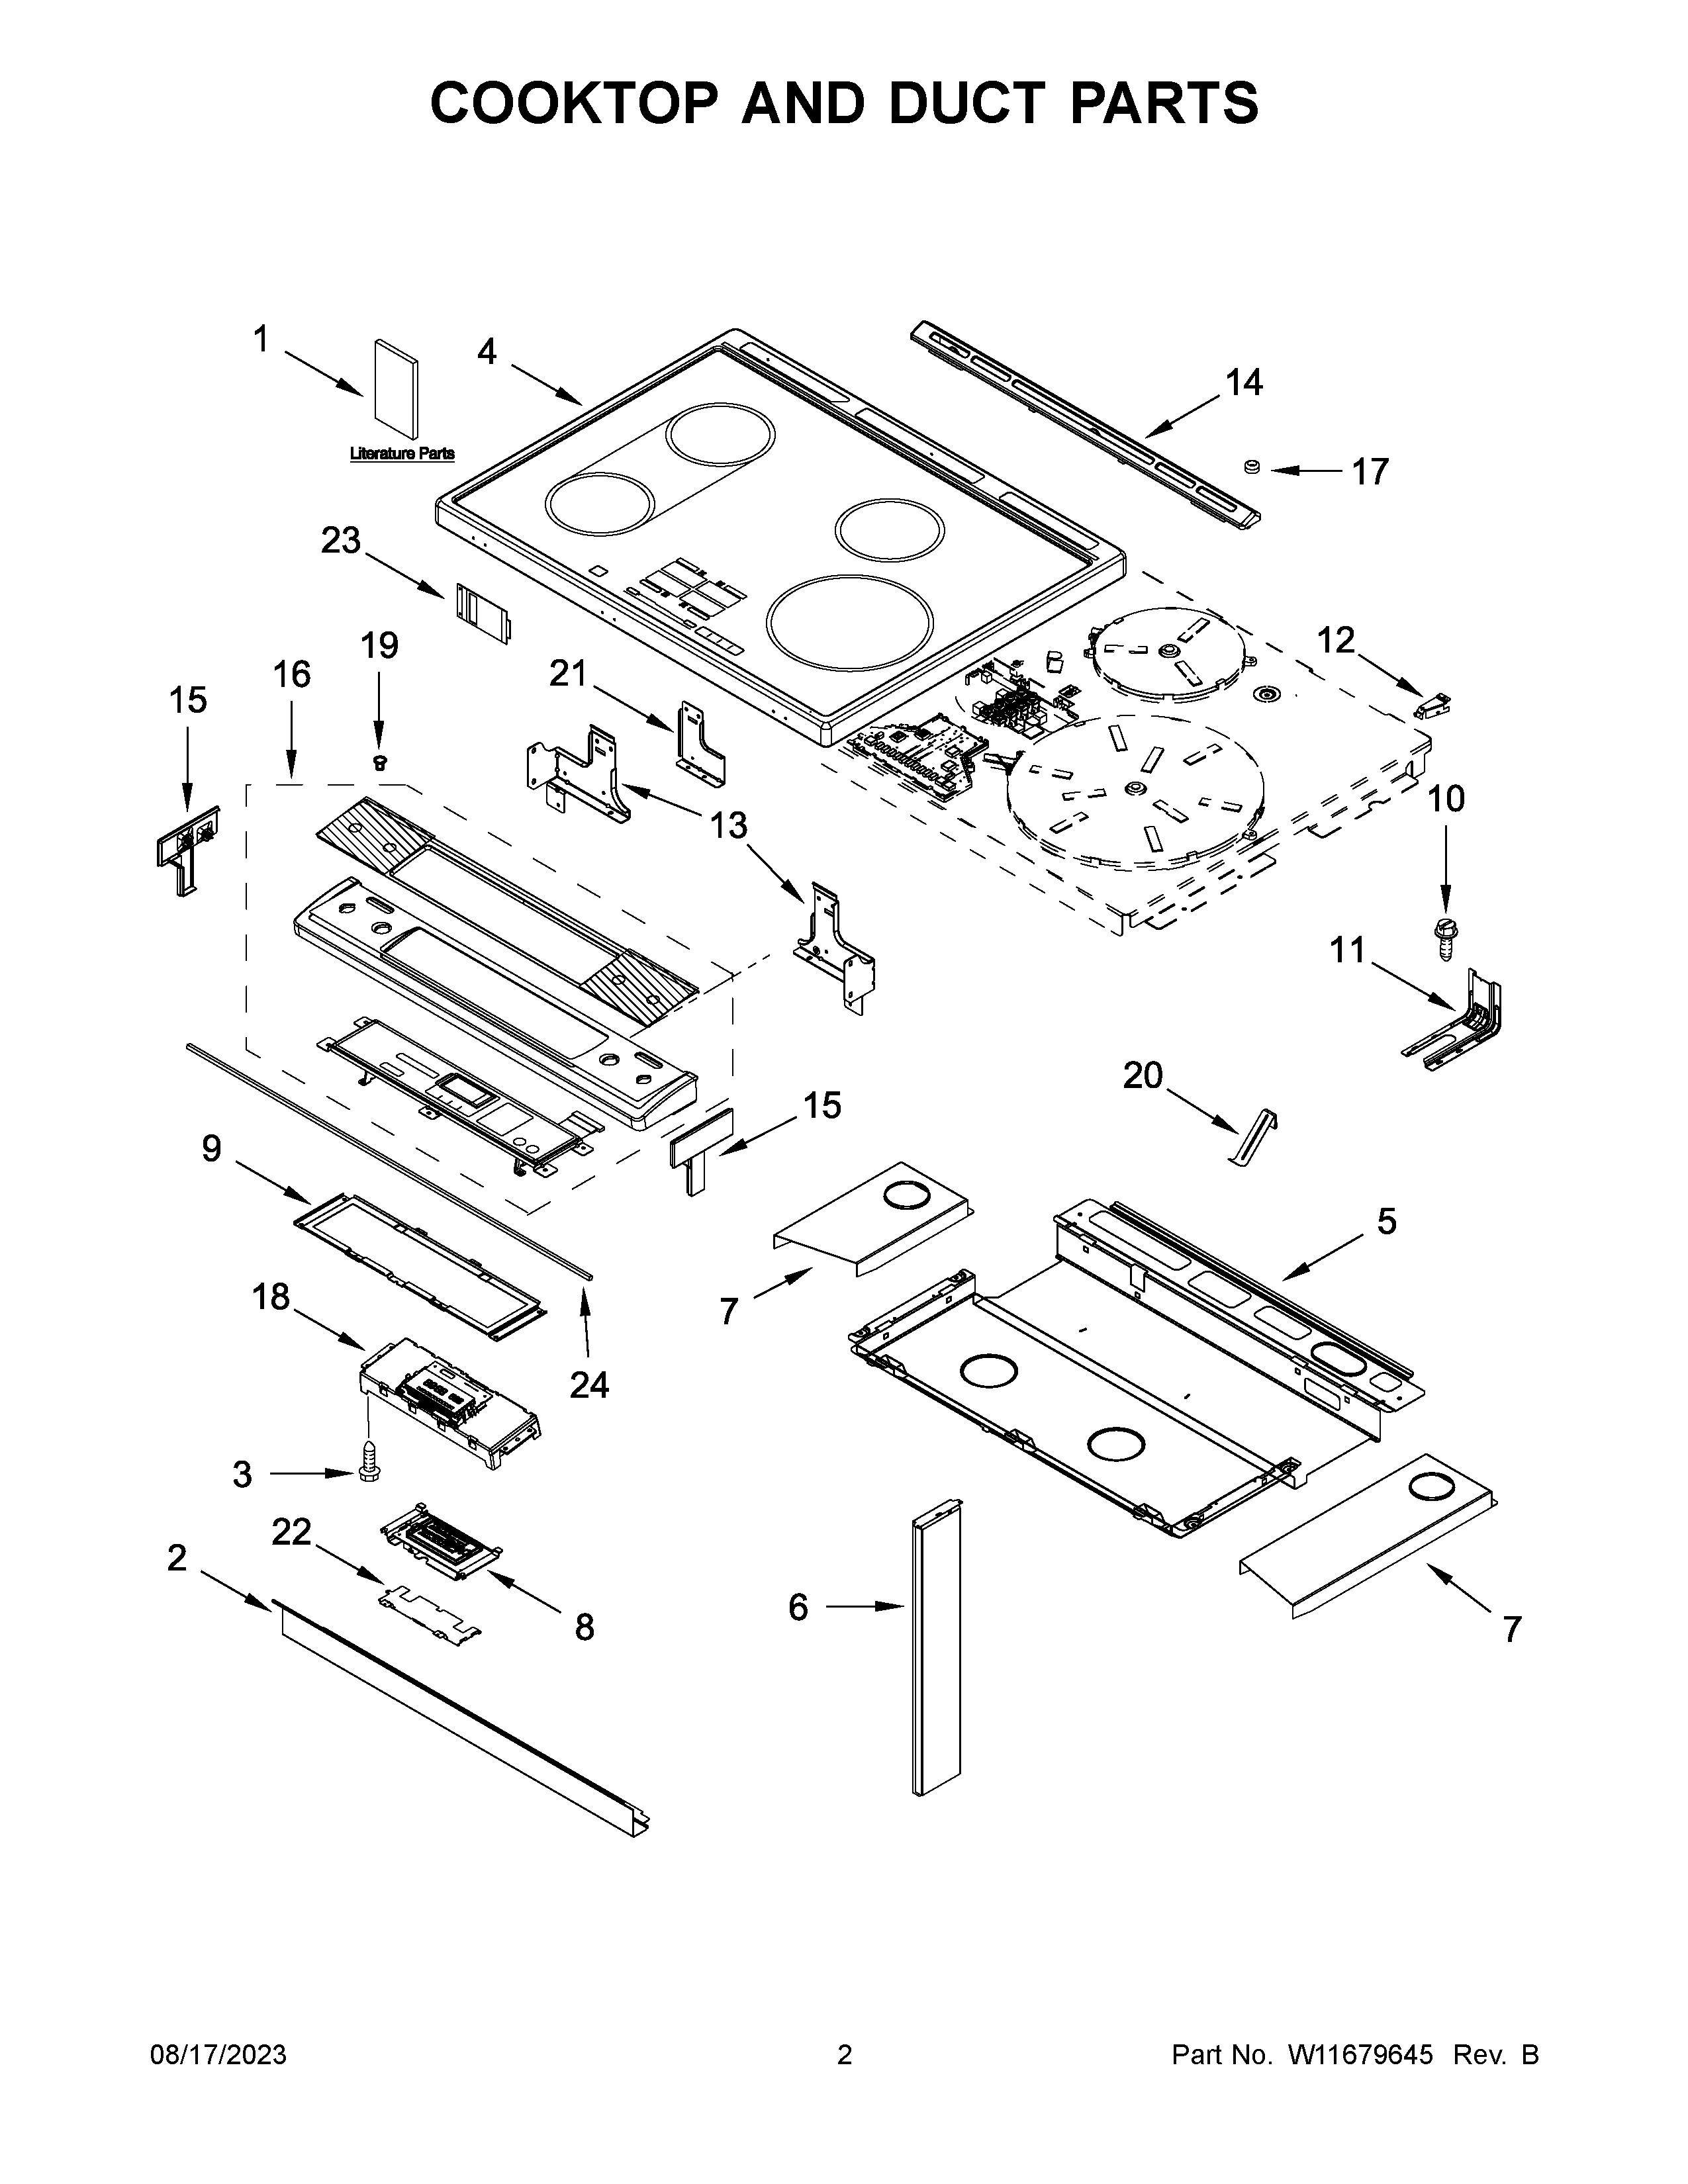 02 - COOKTOP AND DUCT PARTS